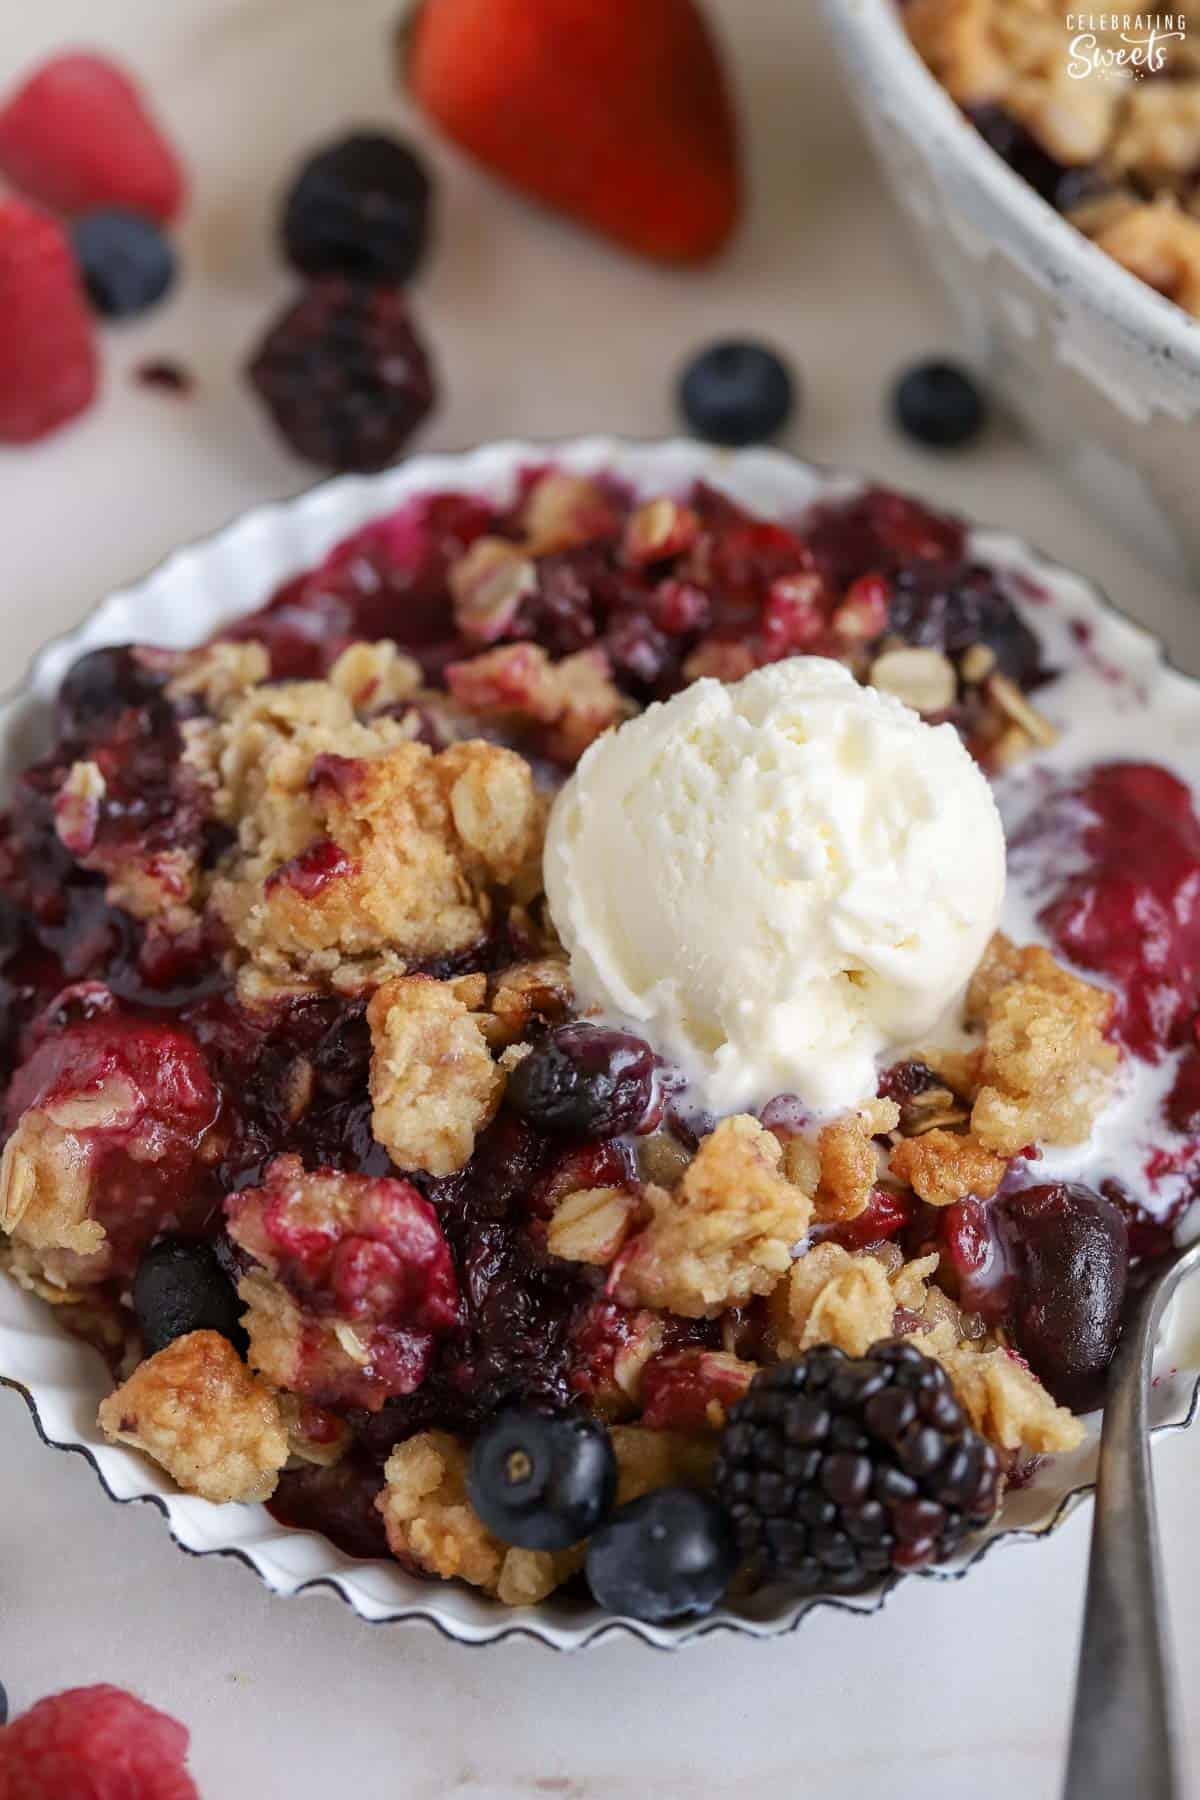 Berry crisp topped with ice cream in a white bowl.